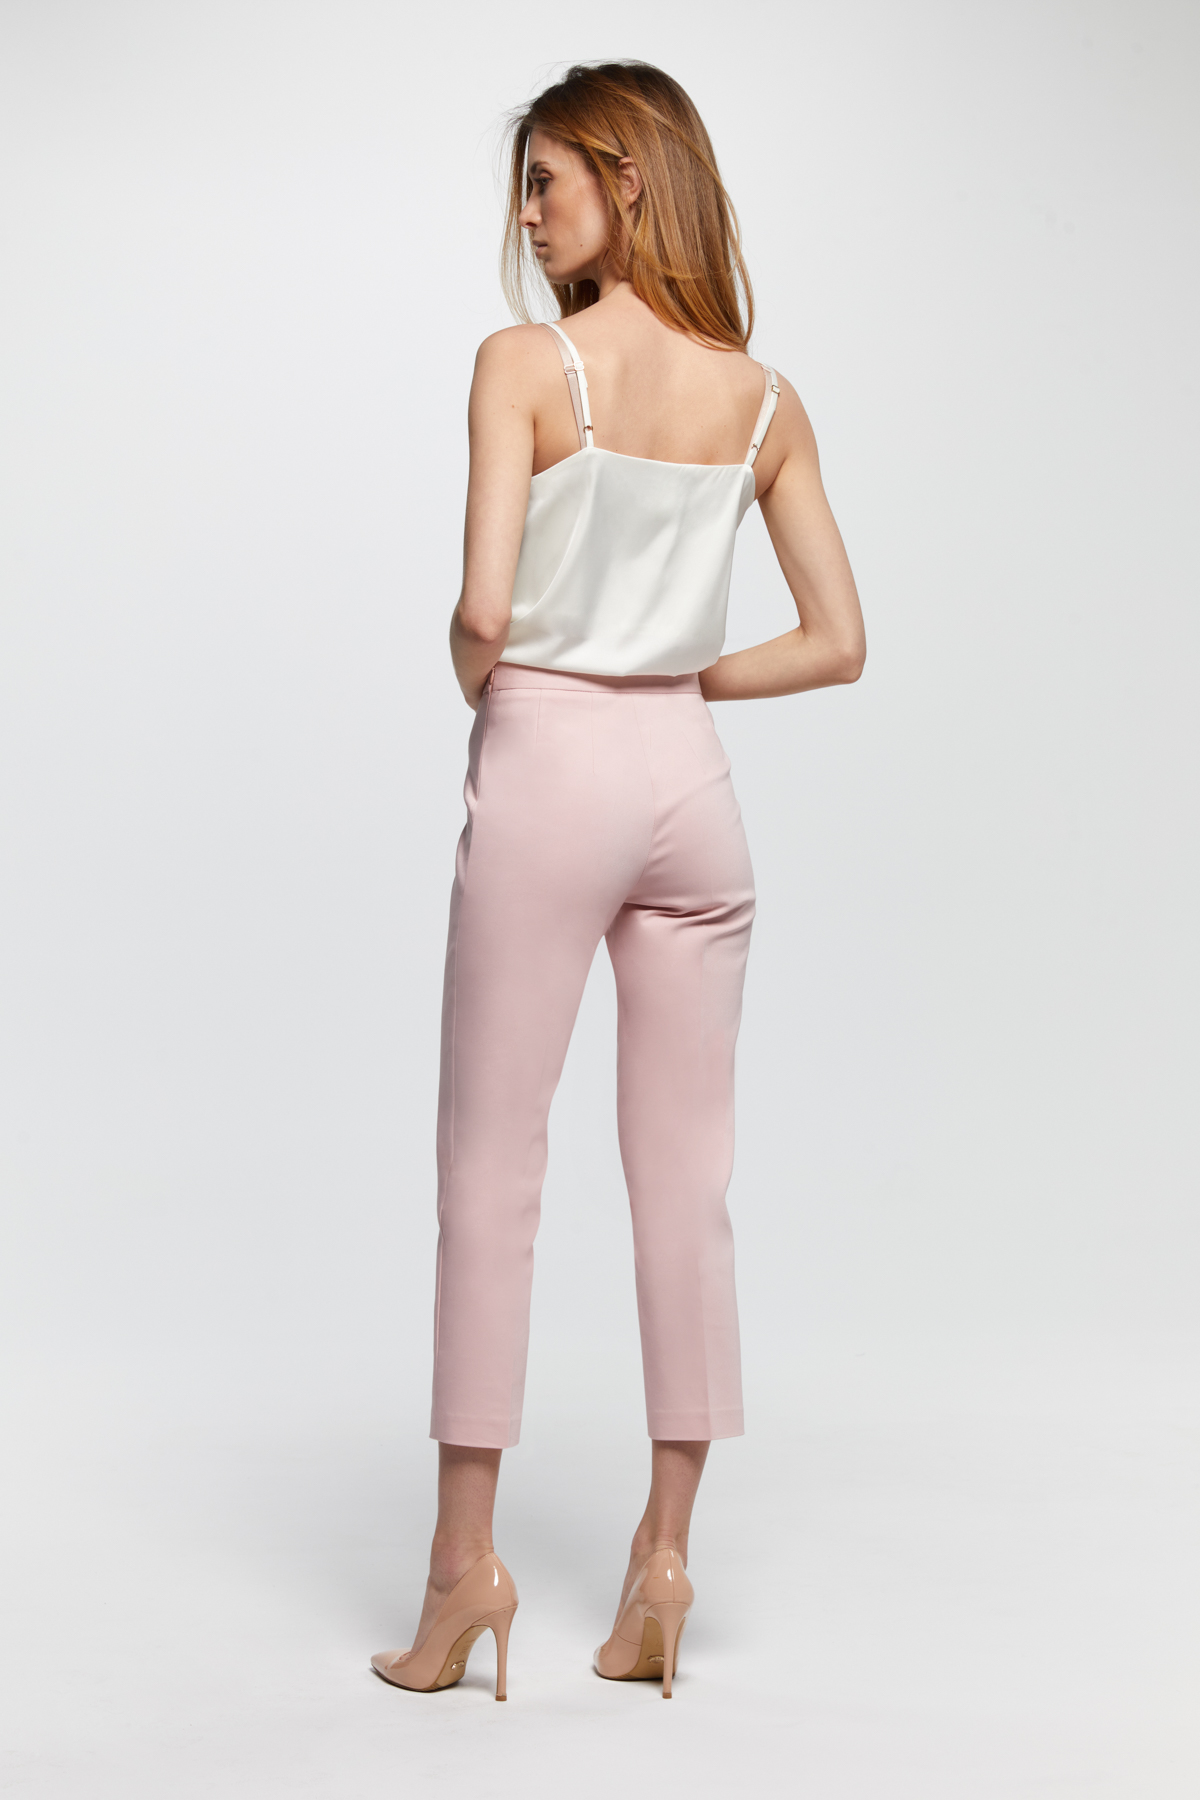 Ann Taylor The Side Zip Trouser Pant Crepe | CoolSprings Galleria